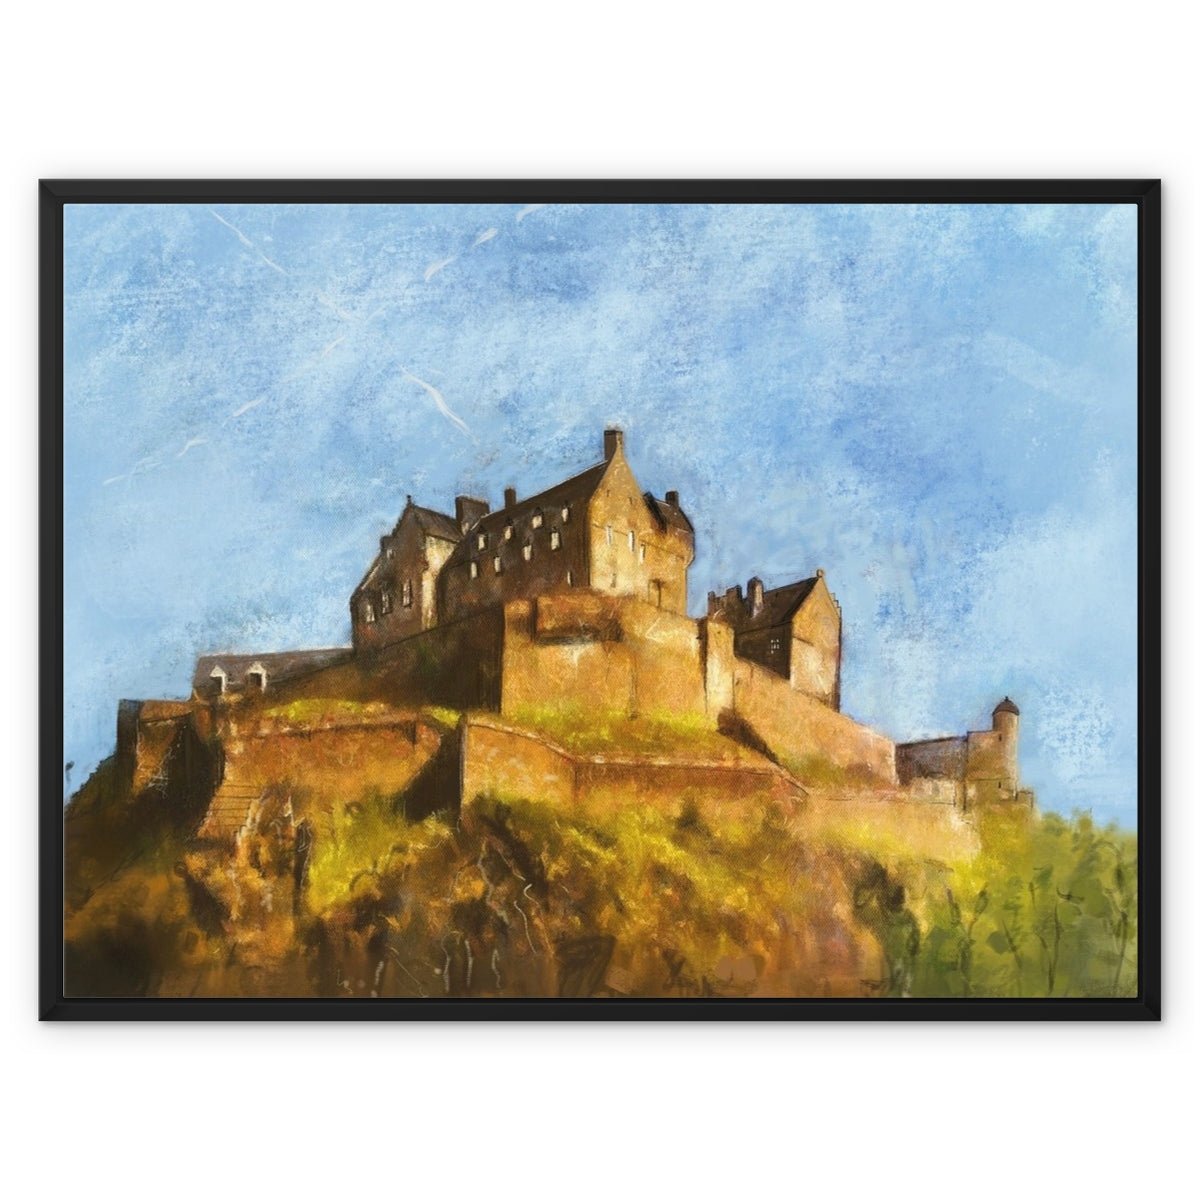 Edinburgh Castle Painting | Framed Canvas From Scotland-Floating Framed Canvas Prints-Edinburgh & Glasgow Art Gallery-32"x24"-Black Frame-Paintings, Prints, Homeware, Art Gifts From Scotland By Scottish Artist Kevin Hunter